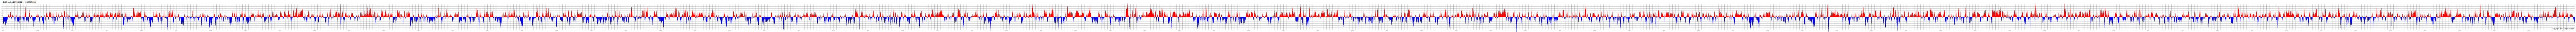 PNA Index since 1950, daily values